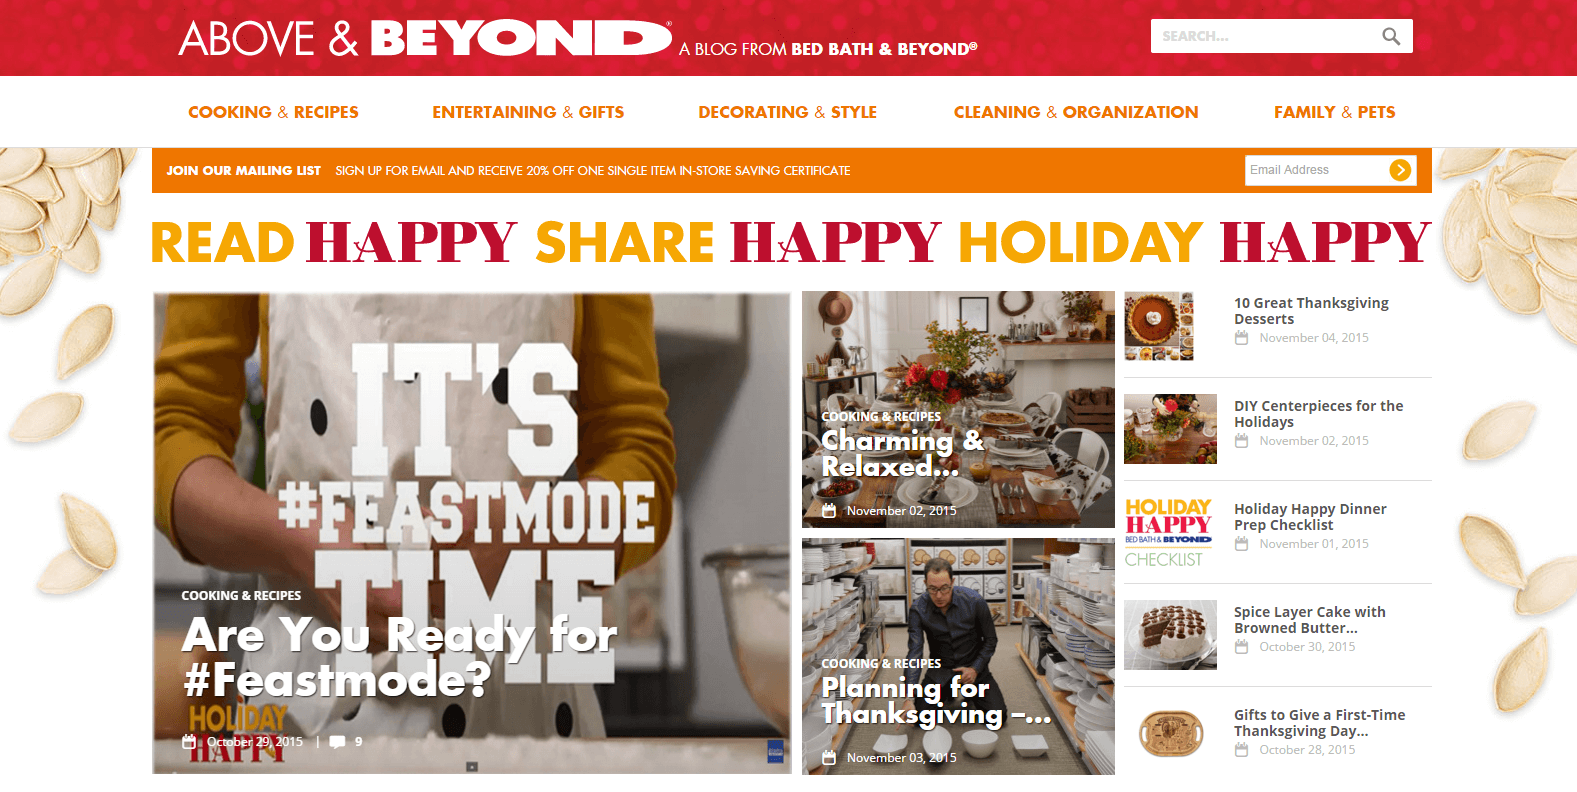  Above & Beyond is a blog with standout examples of shareable content.